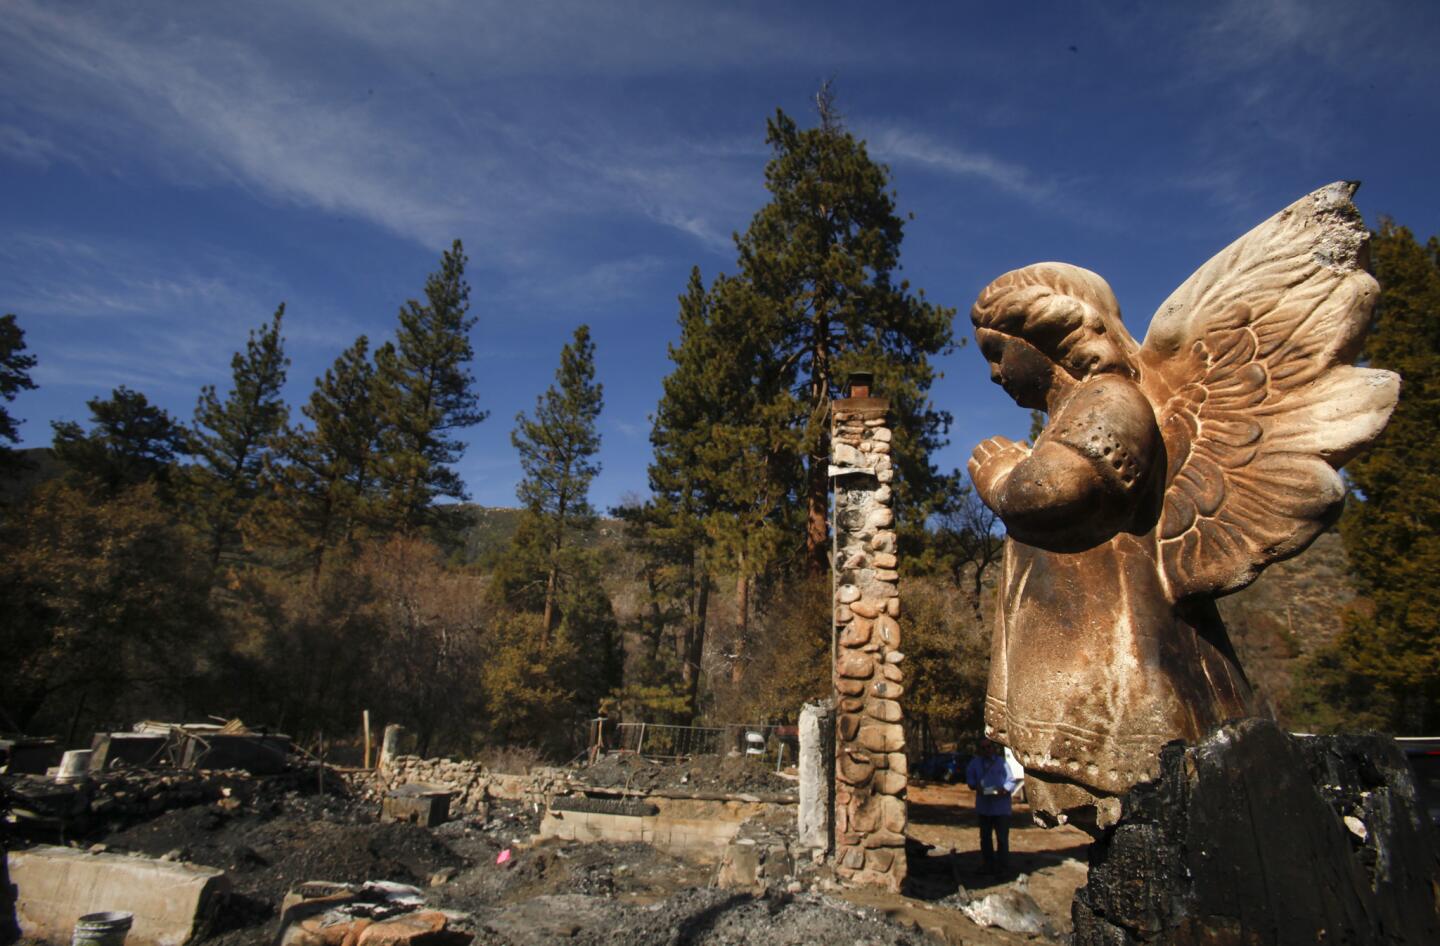 A ceramic angel is charred near the cabin on Seven Oaks Road in Angelus Oaks where former police officer Christopher Dorner died in a shootout with law enforcement. More: Times special report: The manhunt for Christopher Dorner